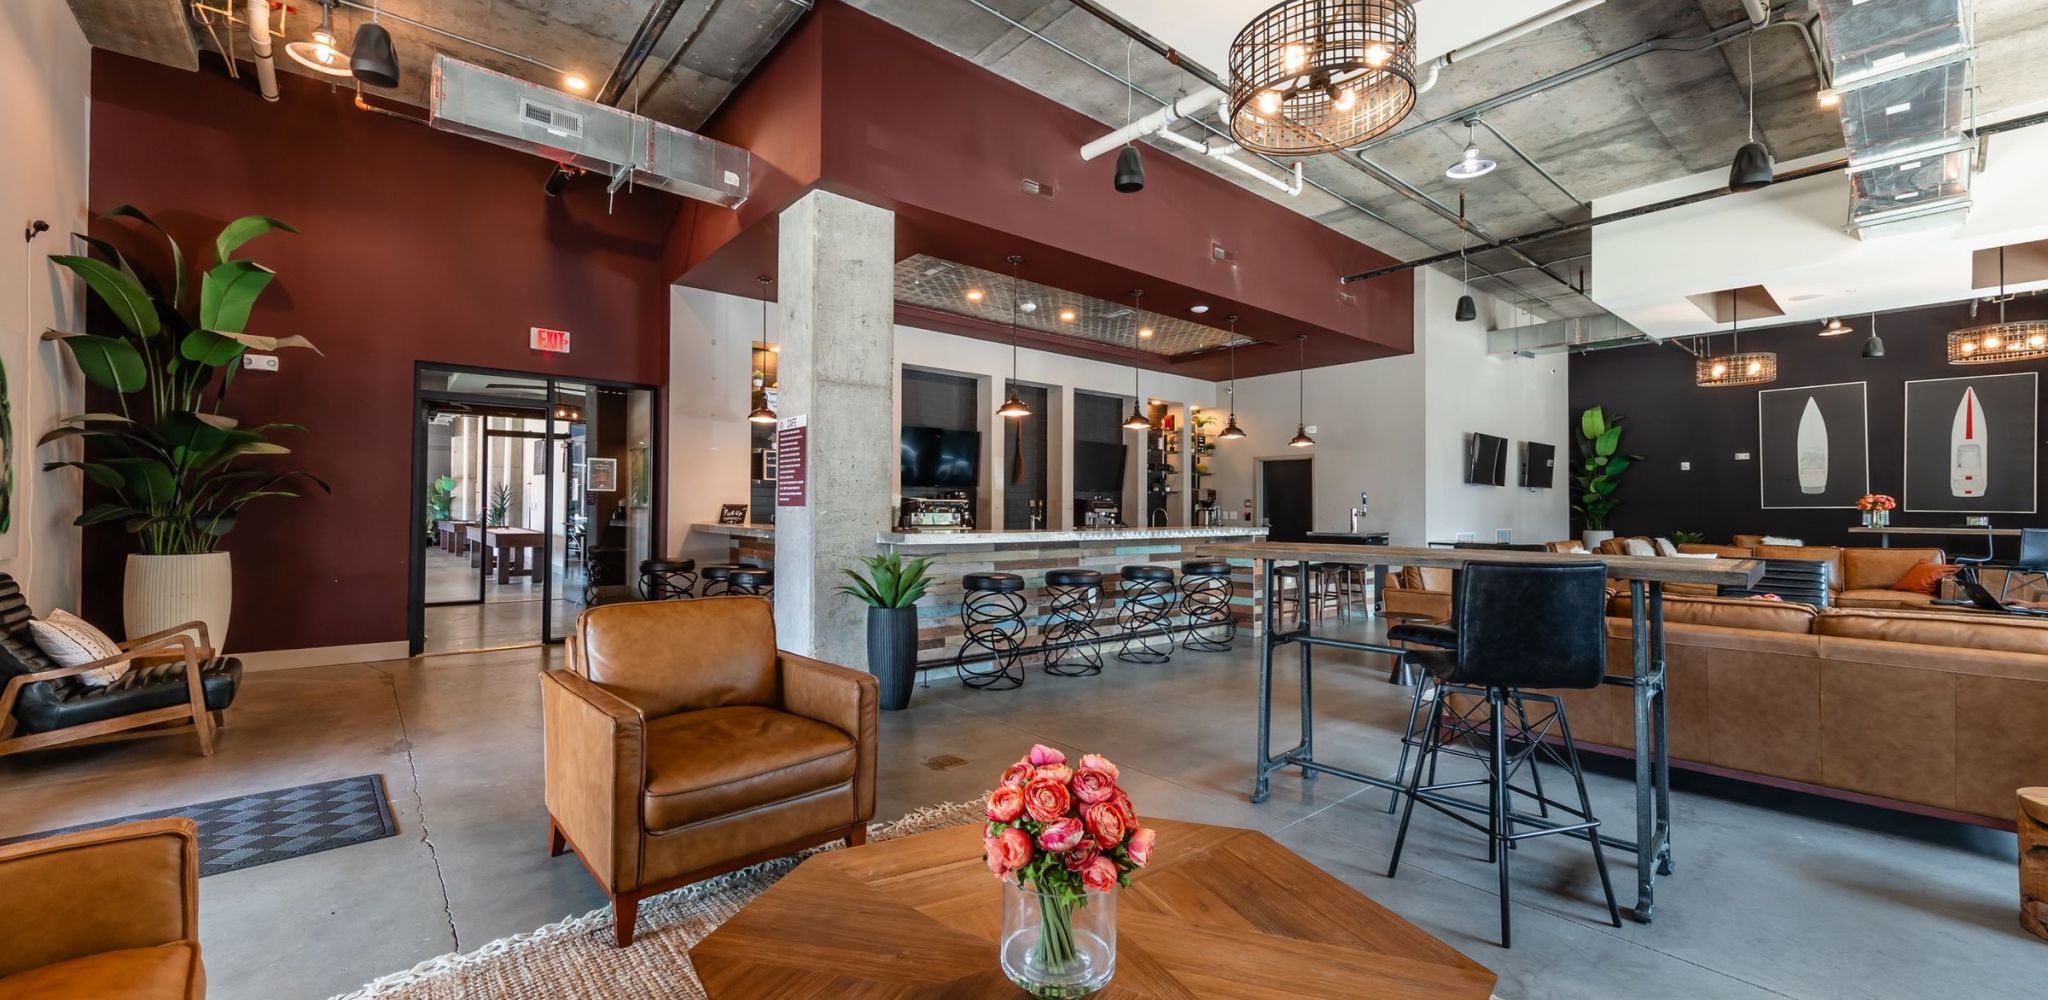 The Village at Commonwealth resident lounge and coffee bar with plenty of seating